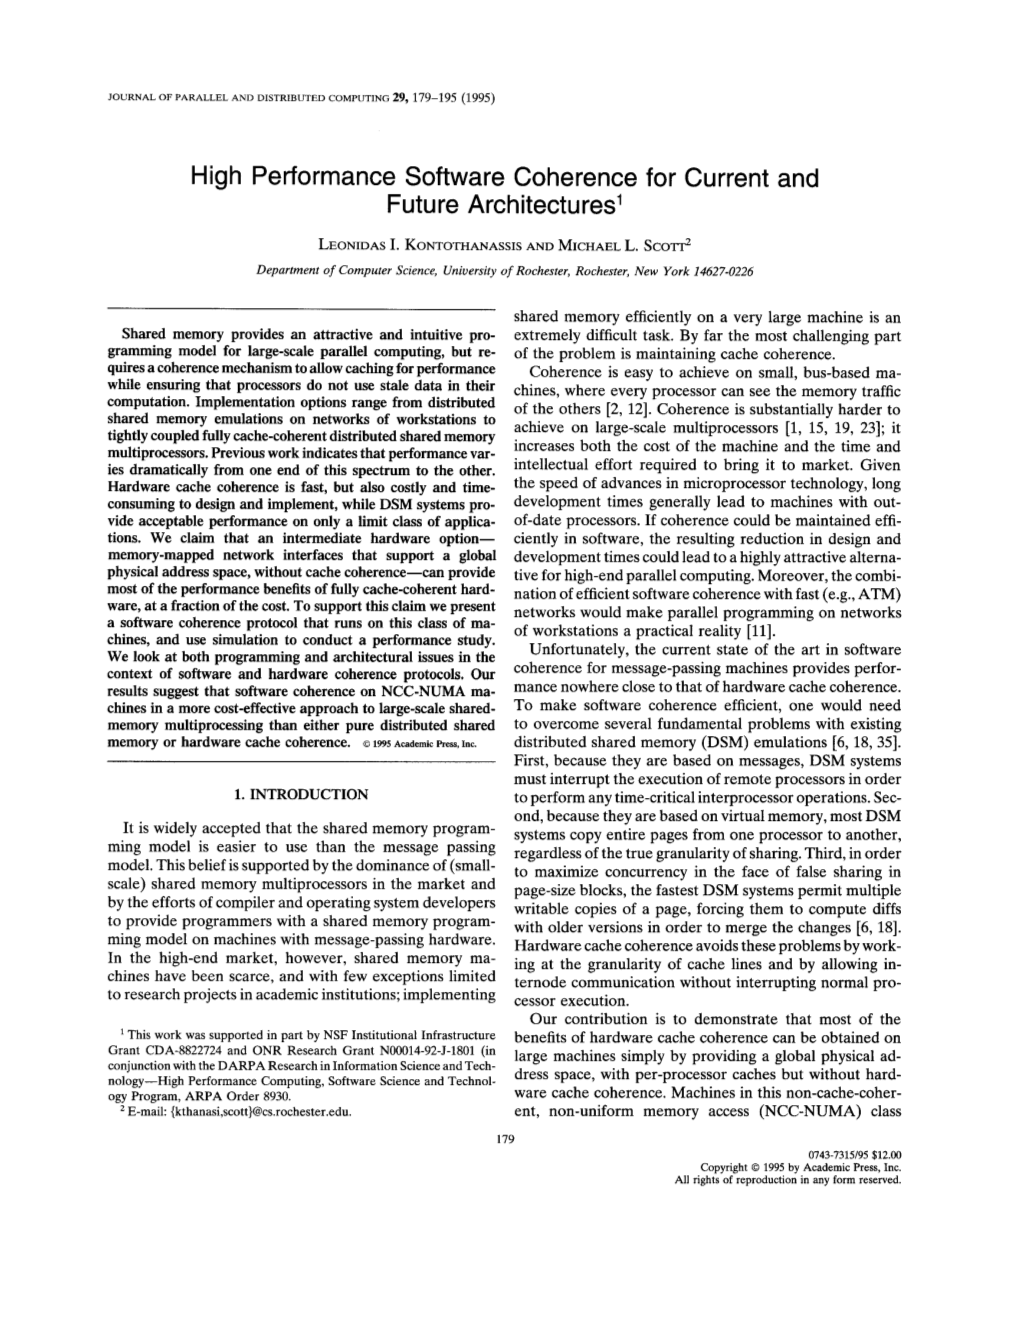 High Performance Software Coherence for Current and Future Architectures1